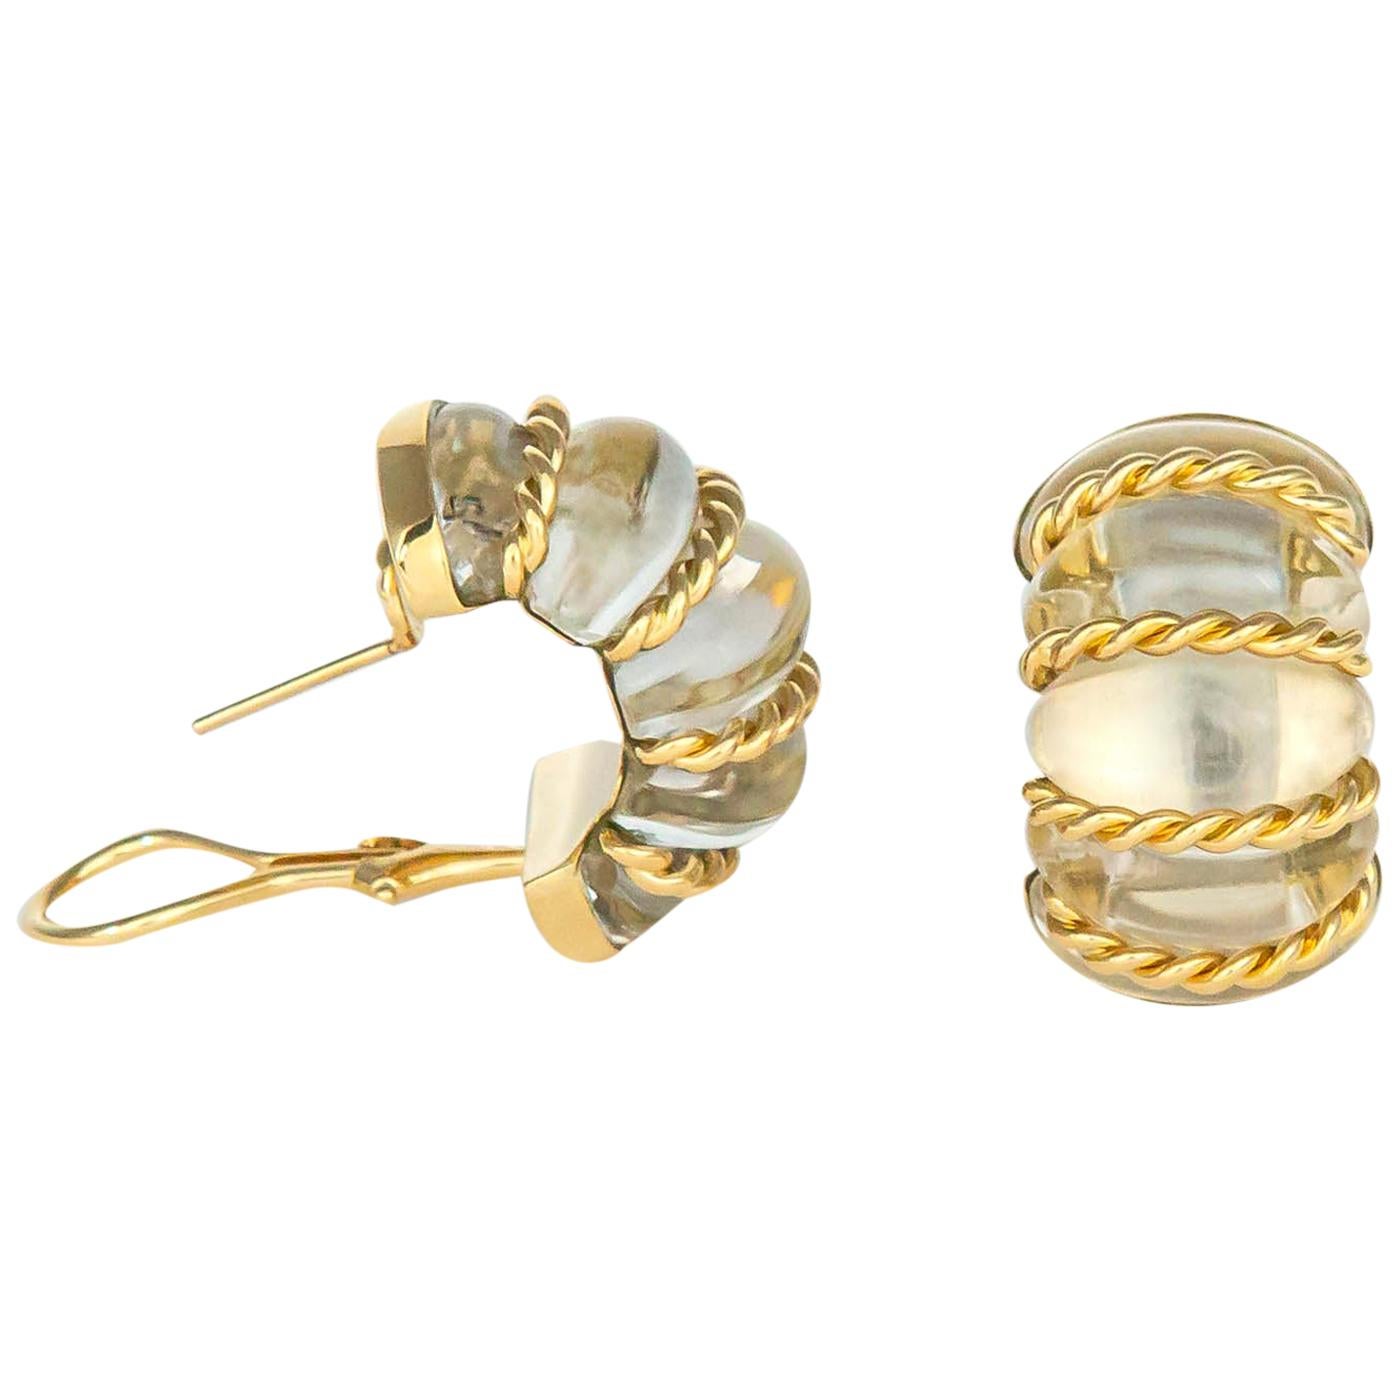 Seaman Schepps Gold and Rock Crystal Earrings